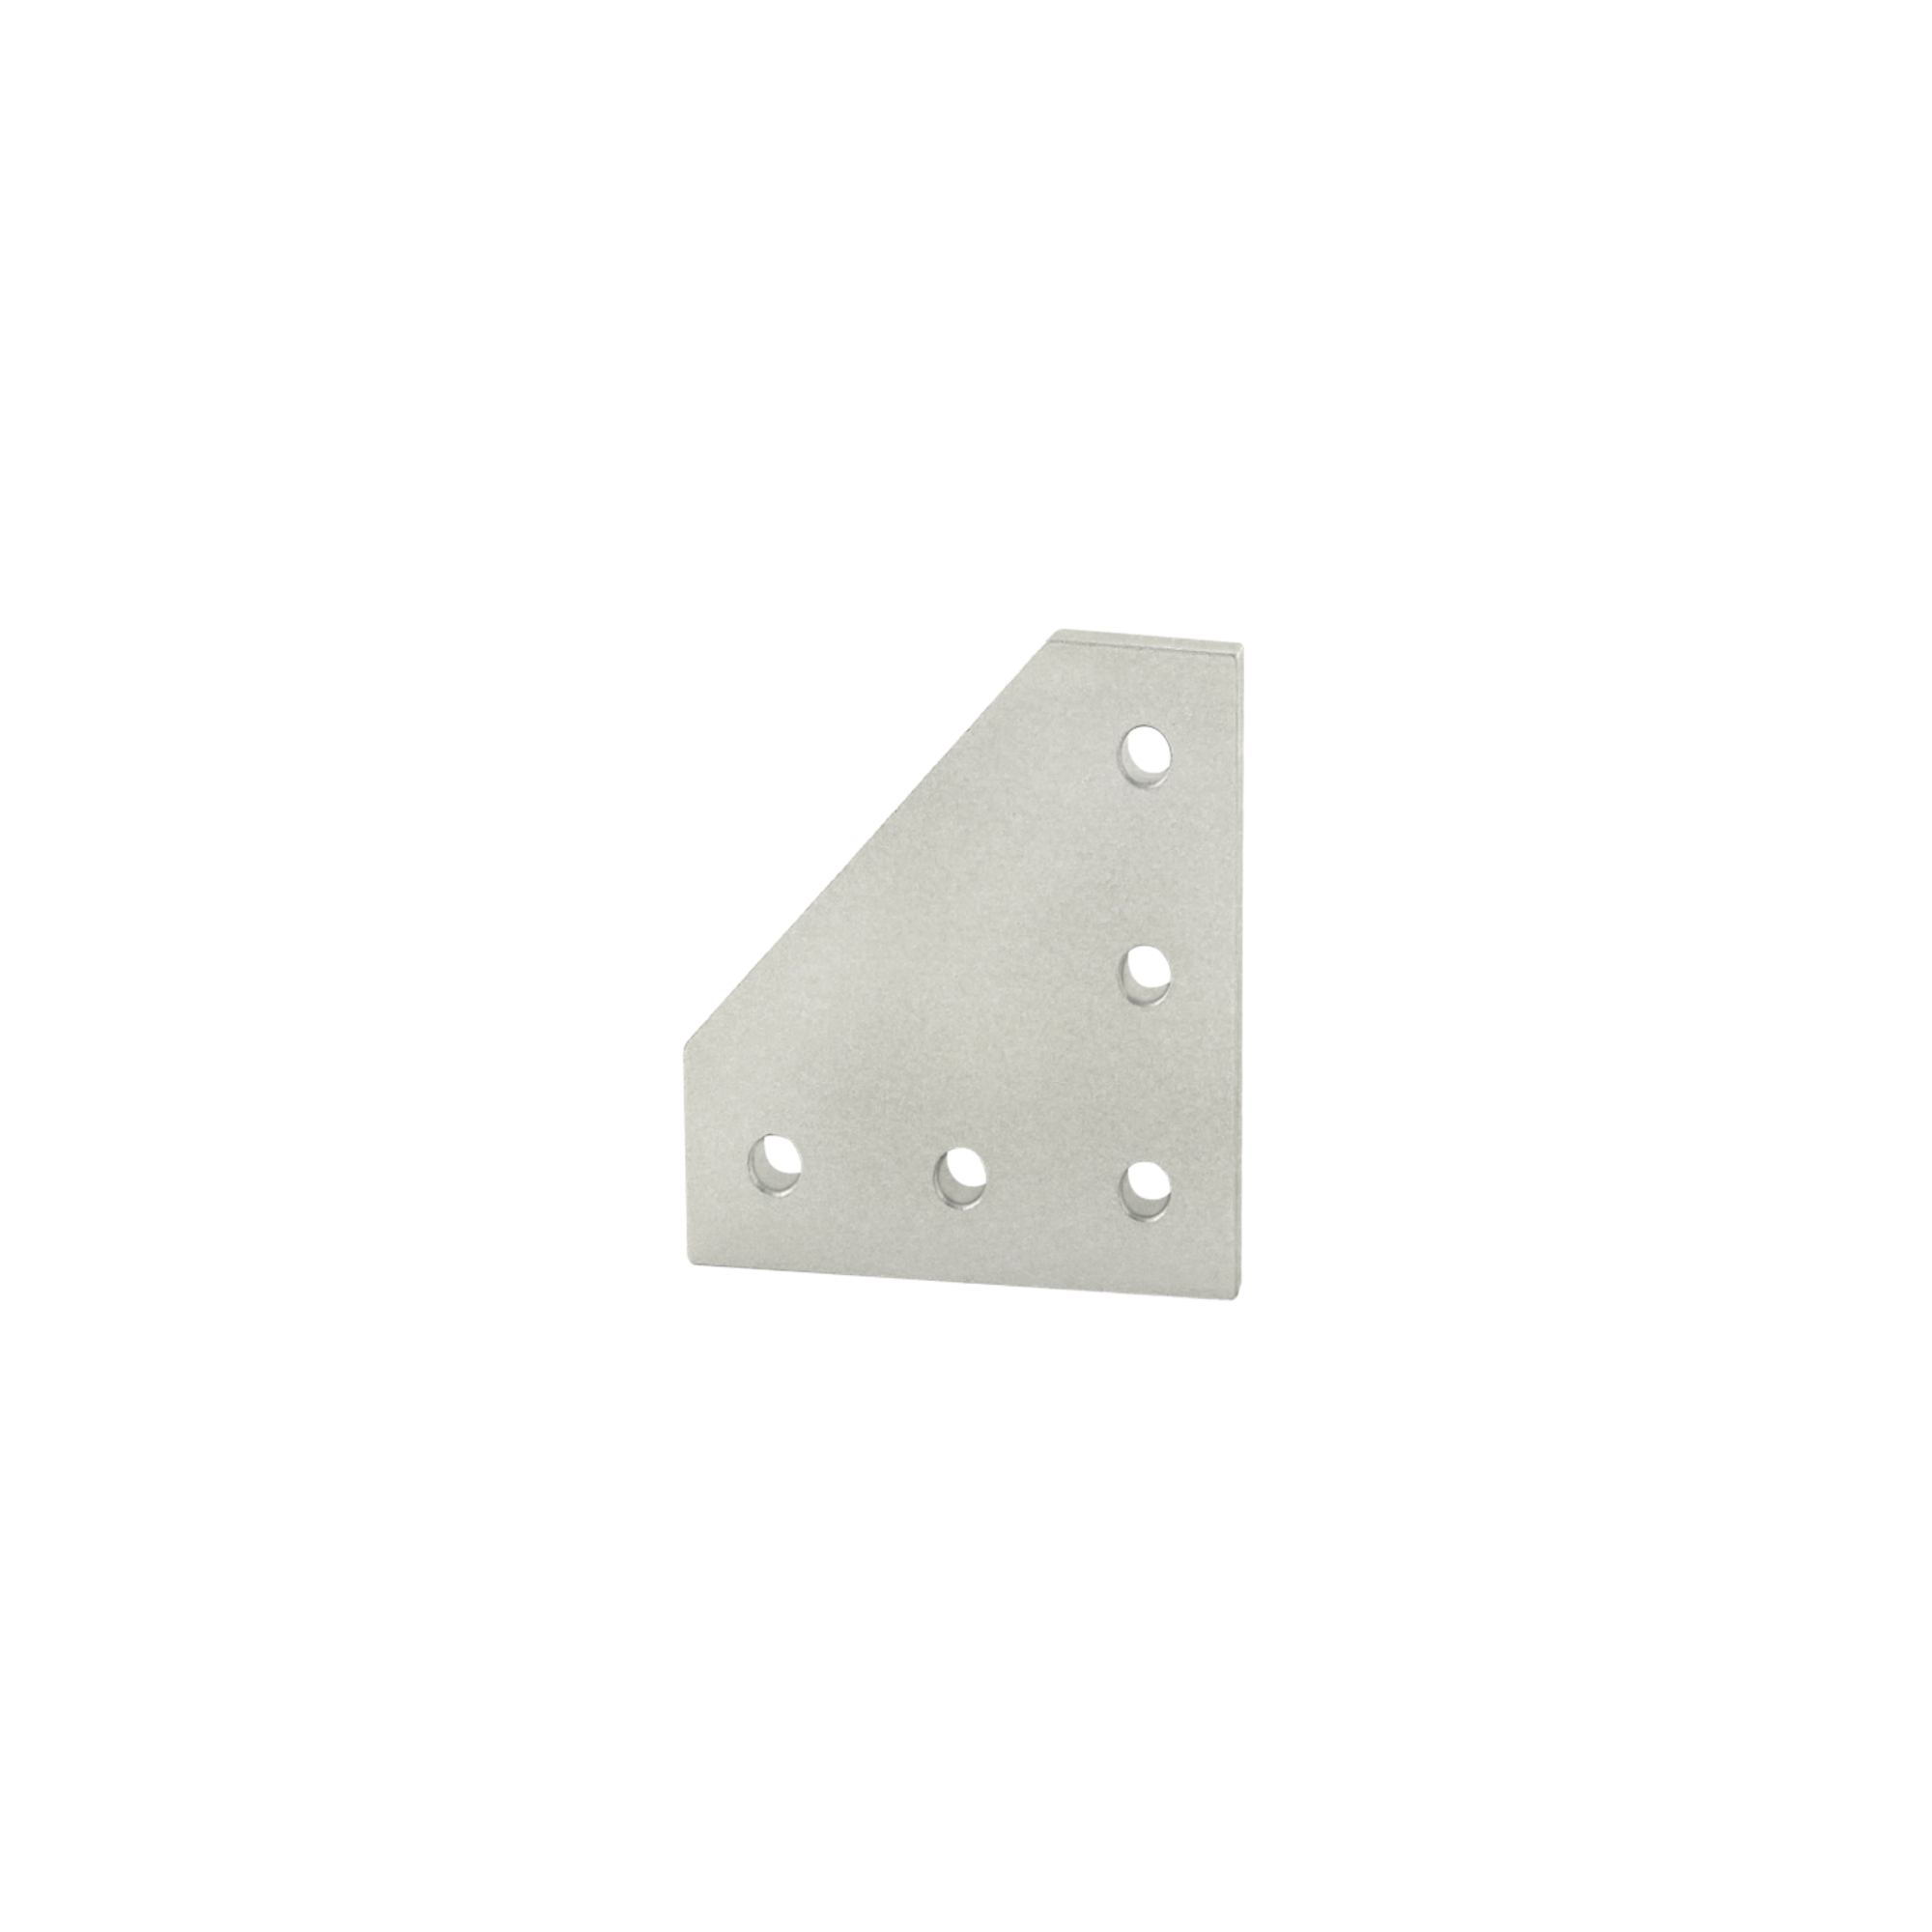 upright rectangular flat plate with an angled left upper corner, three mounting holes along with bottom and two mounting holes along the right side